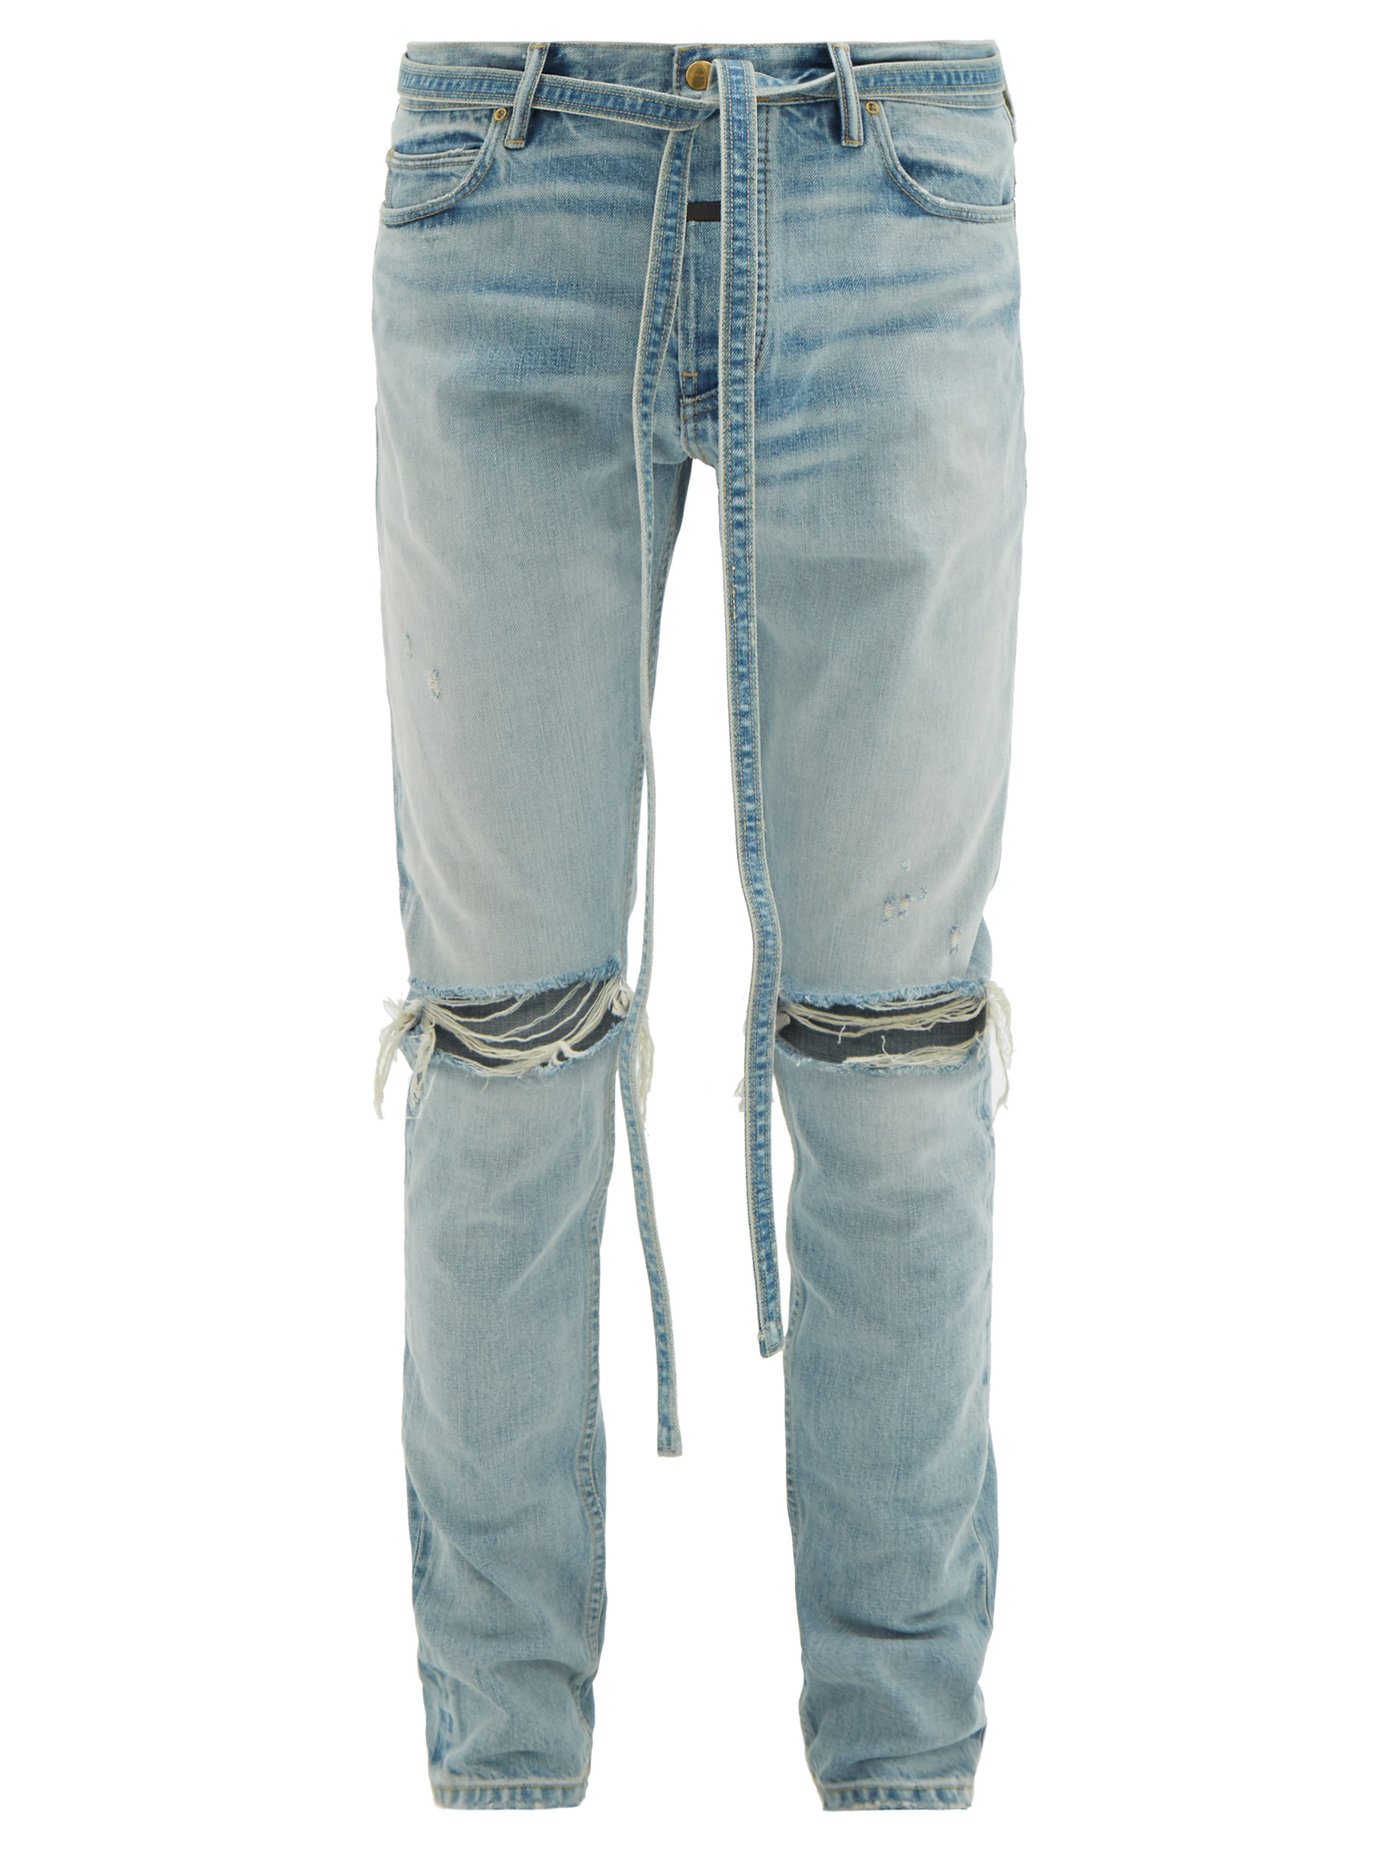 fear of god jeans distressed